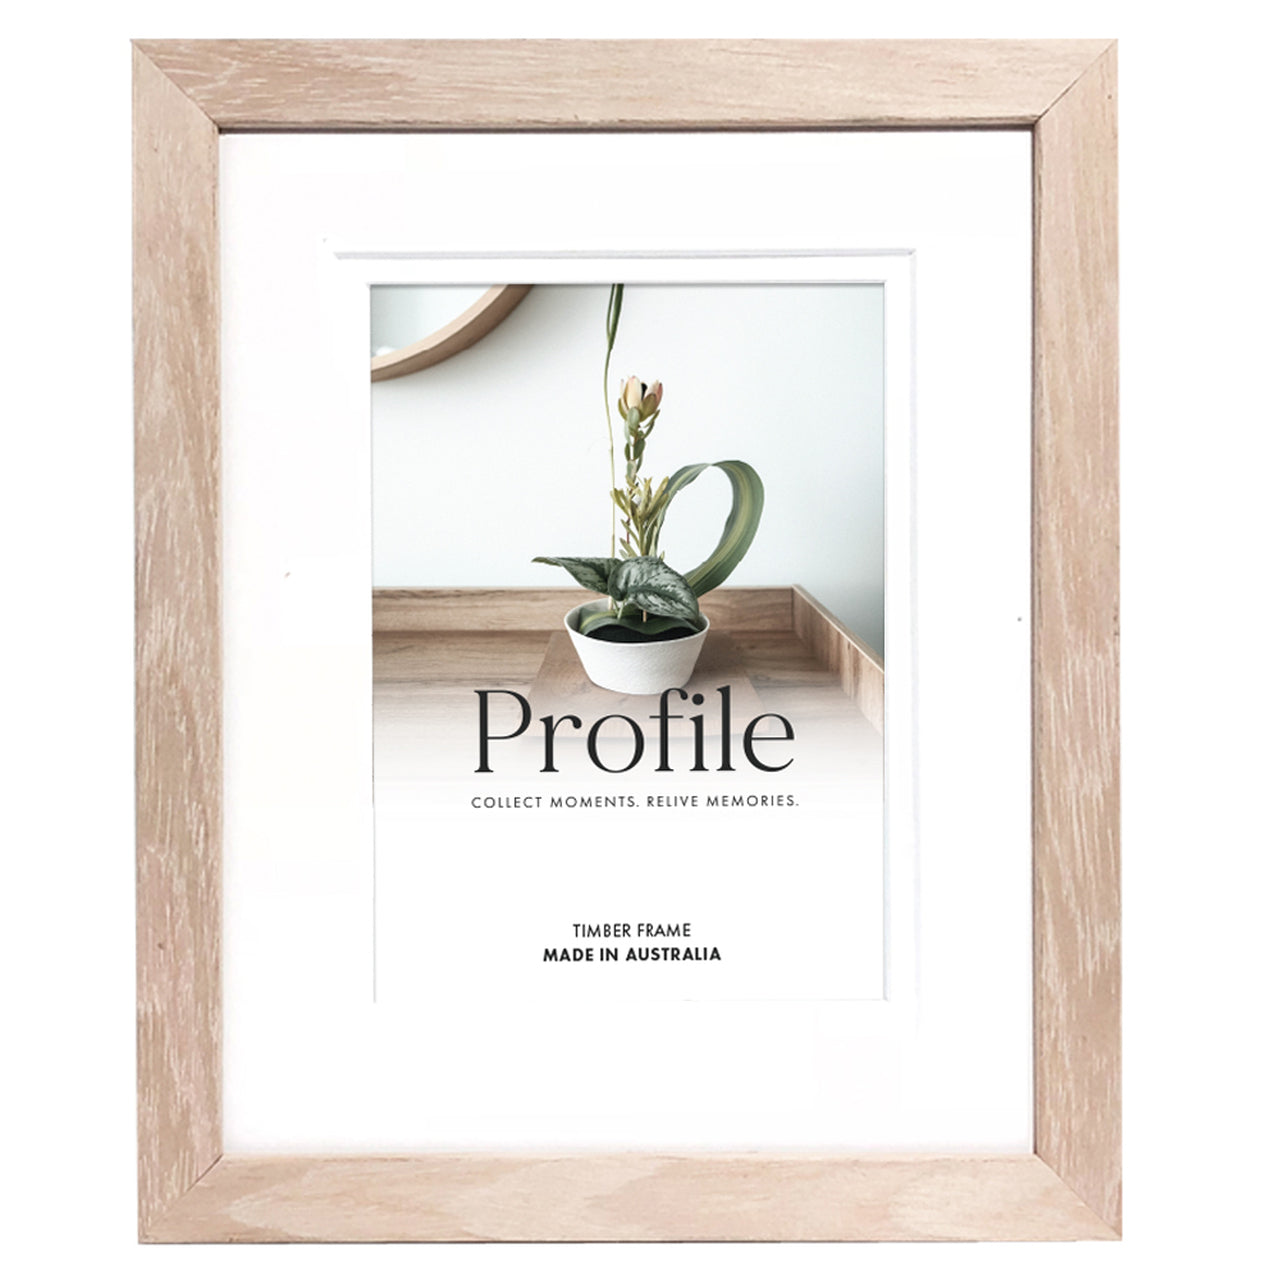 Deluxe Polar Birch 11x14 Photo Frame with 8x10 opening